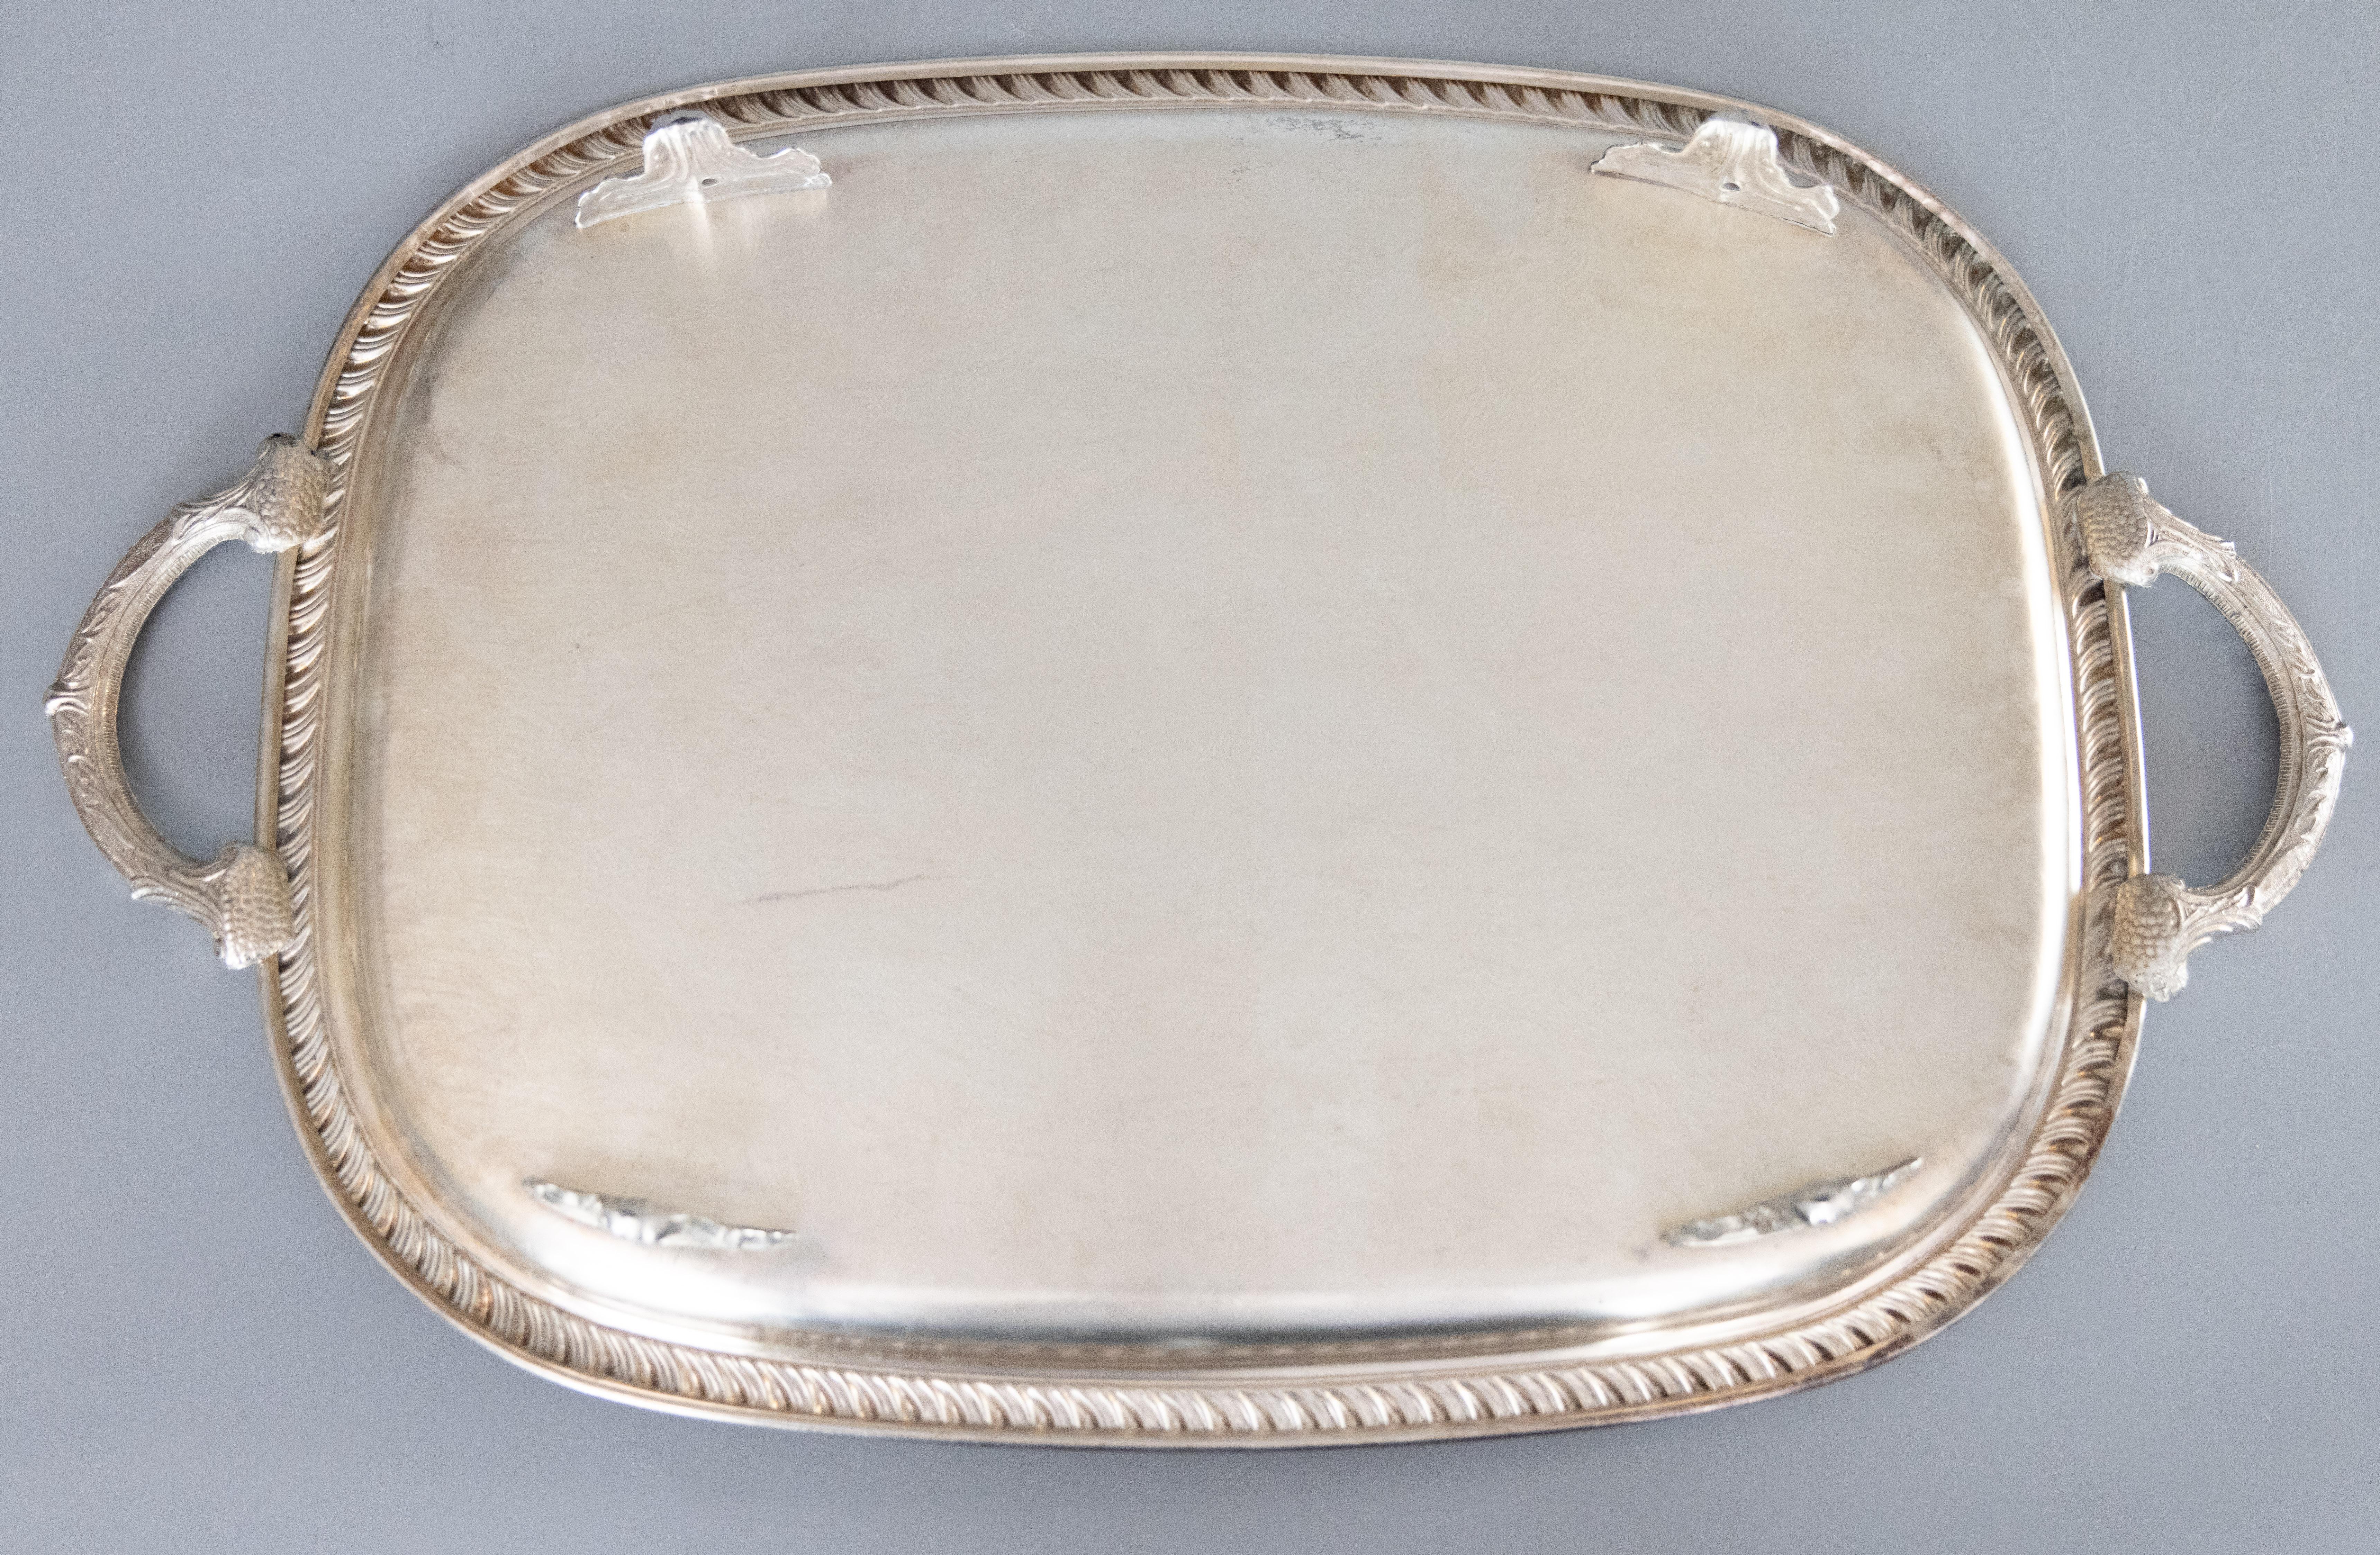 Large Vintage Silver Plate Footed Tray With Handles, circa 1950 For Sale 5